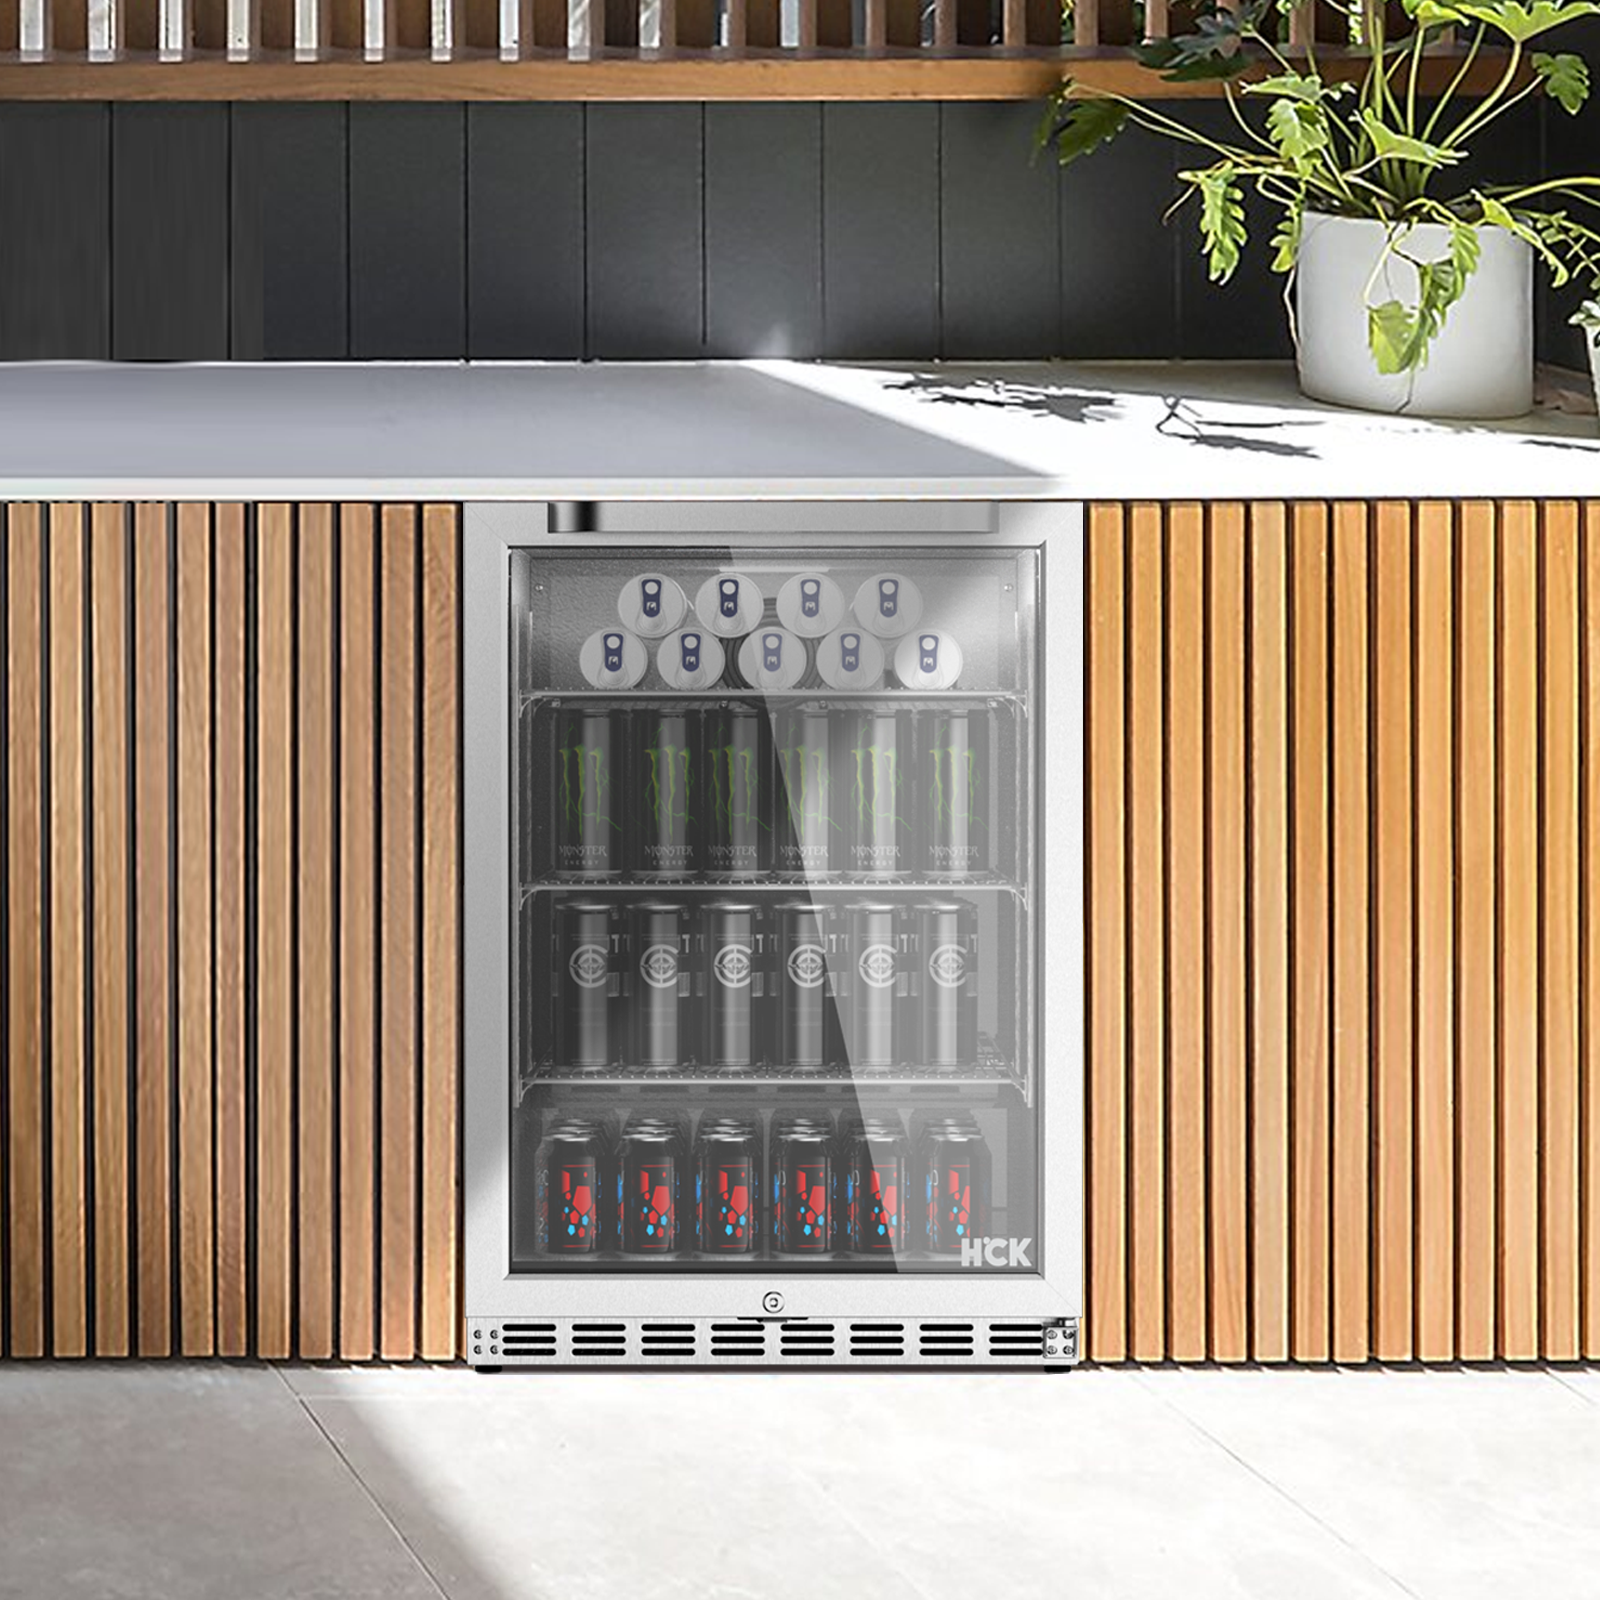 A front view of the outdoor setup with the 5.12 Cu Ft Beverage Outdoor Refrigerator 132 cans installed in a suitable place. A flower pot is positioned above the fridge